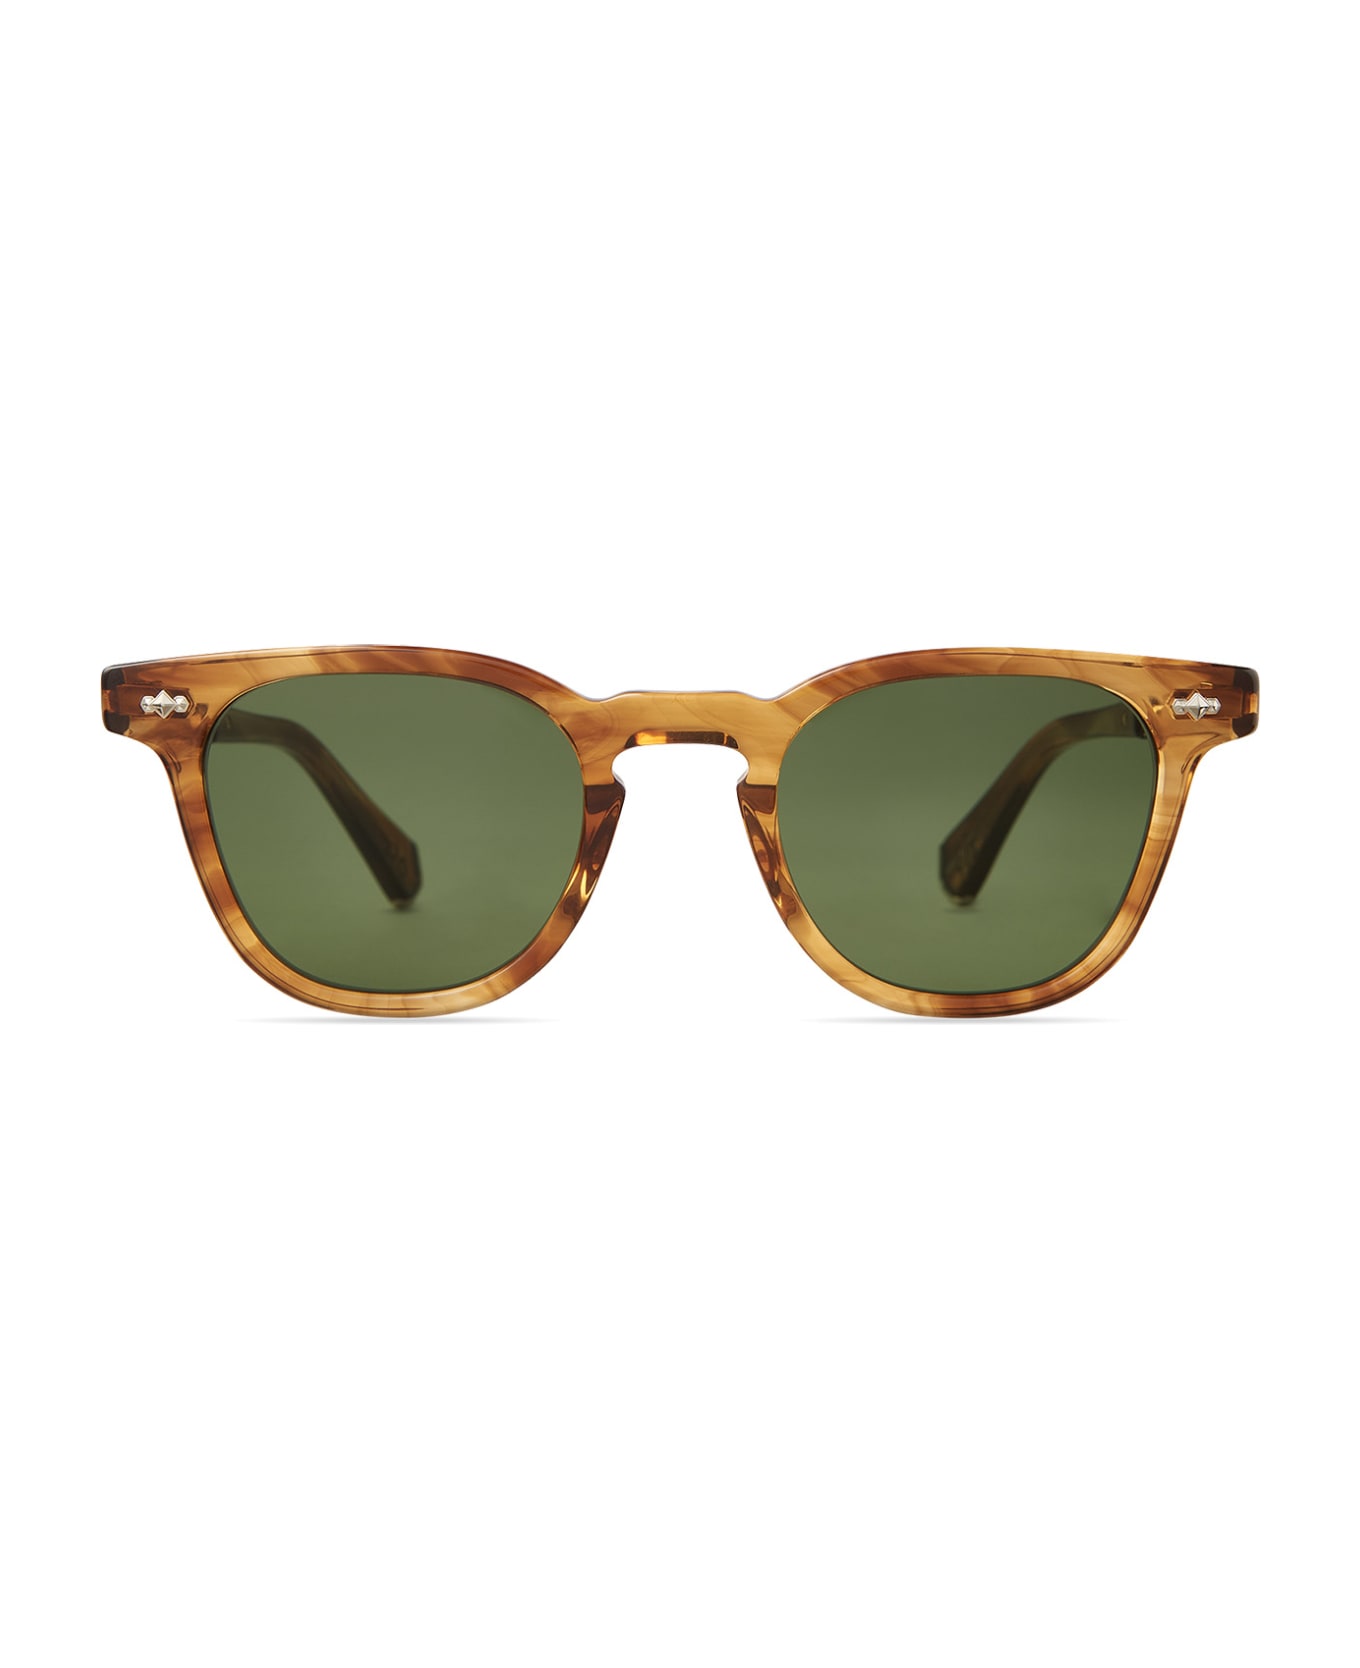 Mr. Leight Dean S Marbled Rye-white Gold Sunglasses - Marbled Rye-White Gold